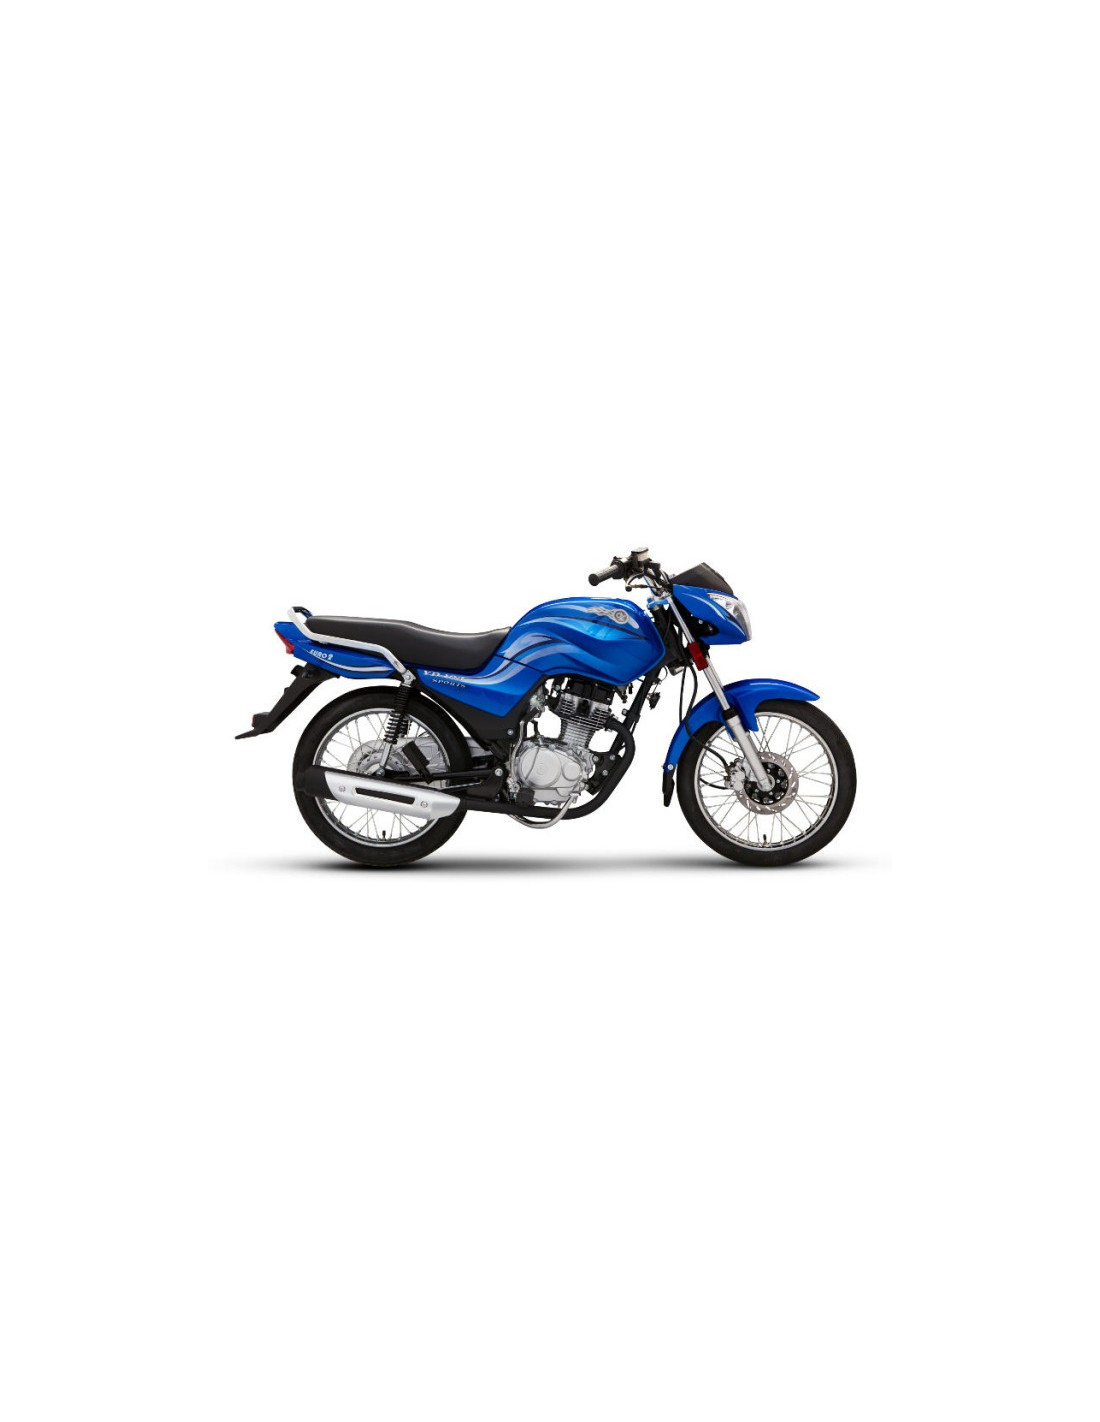 Dyl Yd 125 Sports Price In Pakistan Rating Reviews And Pictures